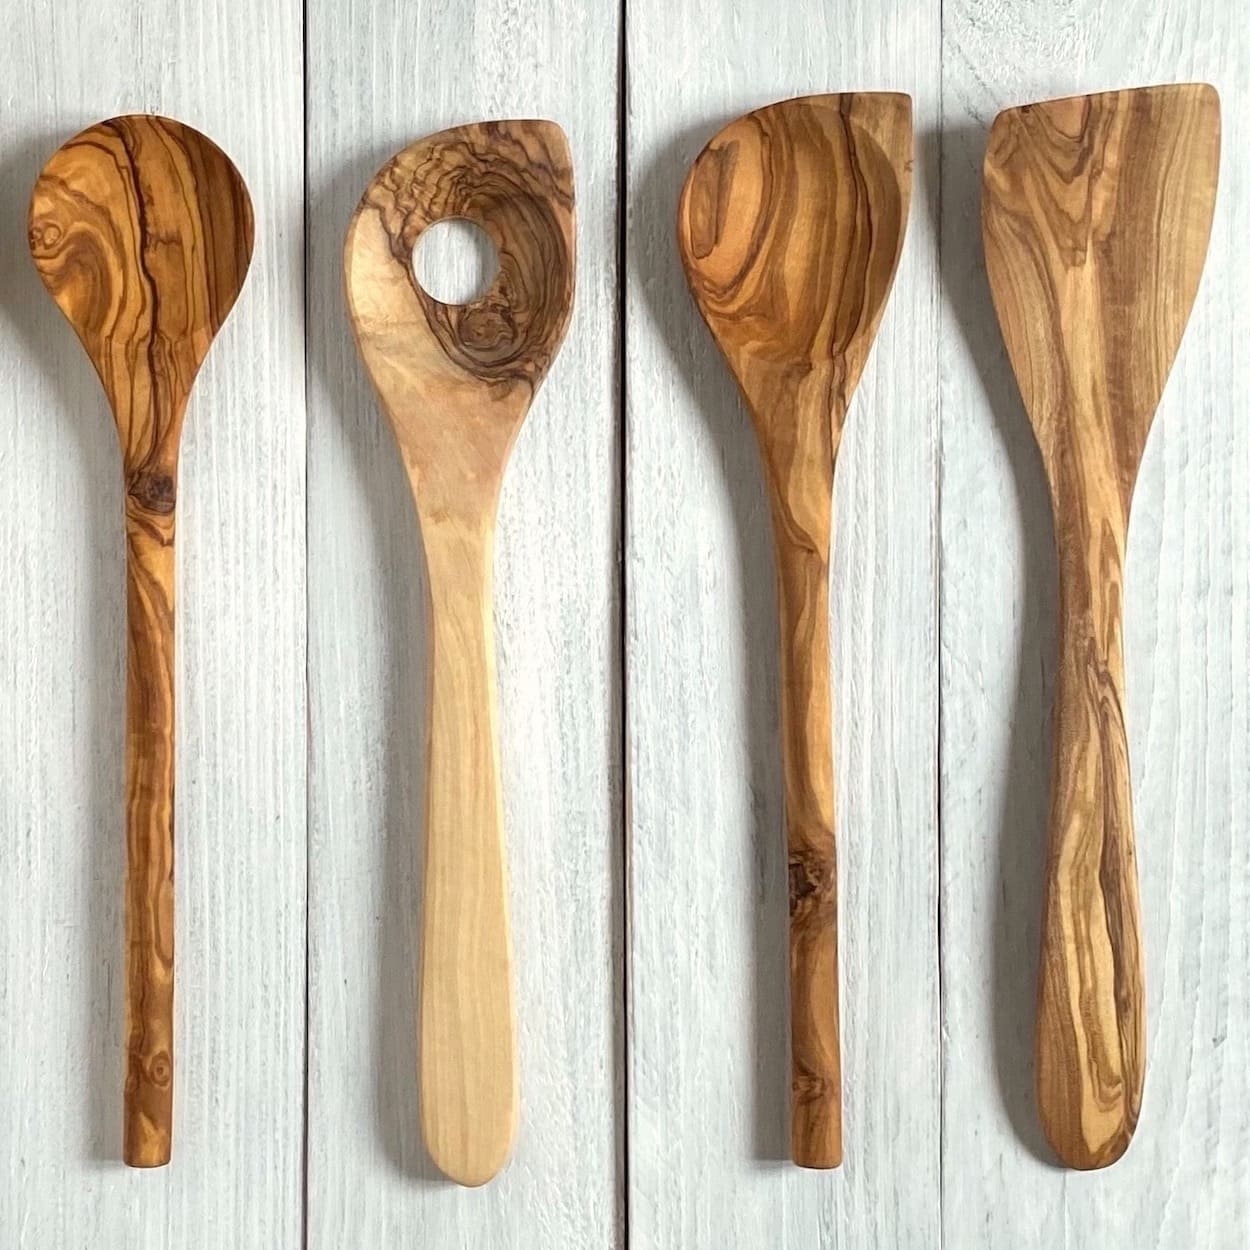 Olive Wood Round Mixing Spoon